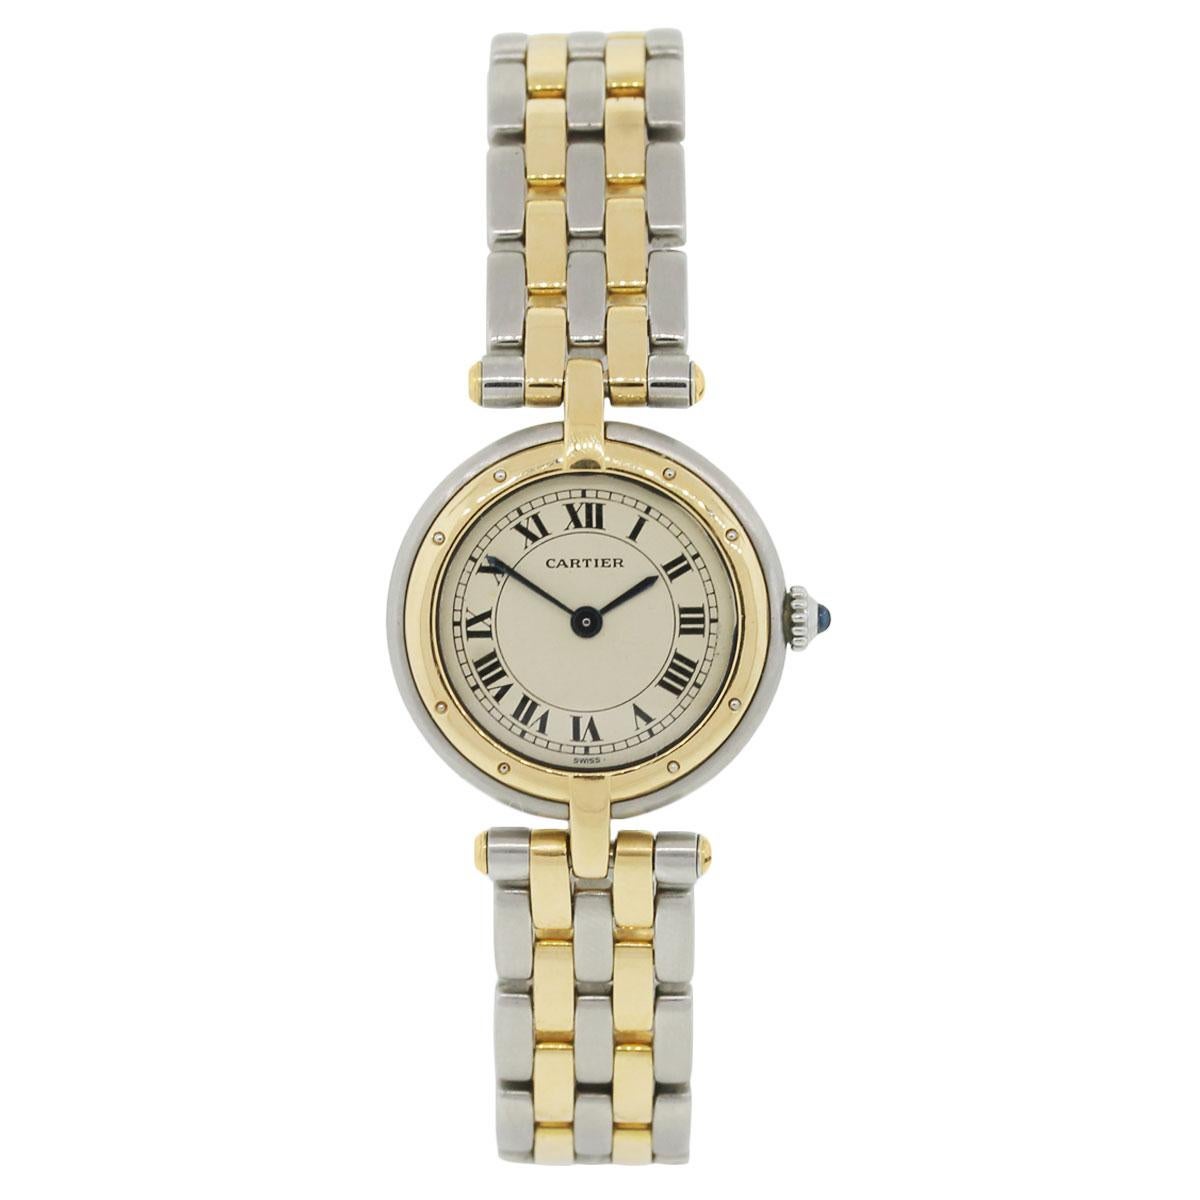 Brand: Cartier
MPN: 17736
Model: Cougar Vendome
Case Material: Stainless steel
Case Diameter: 23mm
Crystal: Sapphire
Bezel: 18k yellow gold bezel
Dial: White roman dial
Bracelet: Stainless steel and 18k yellow gold
Size: Will fit a 6.75″